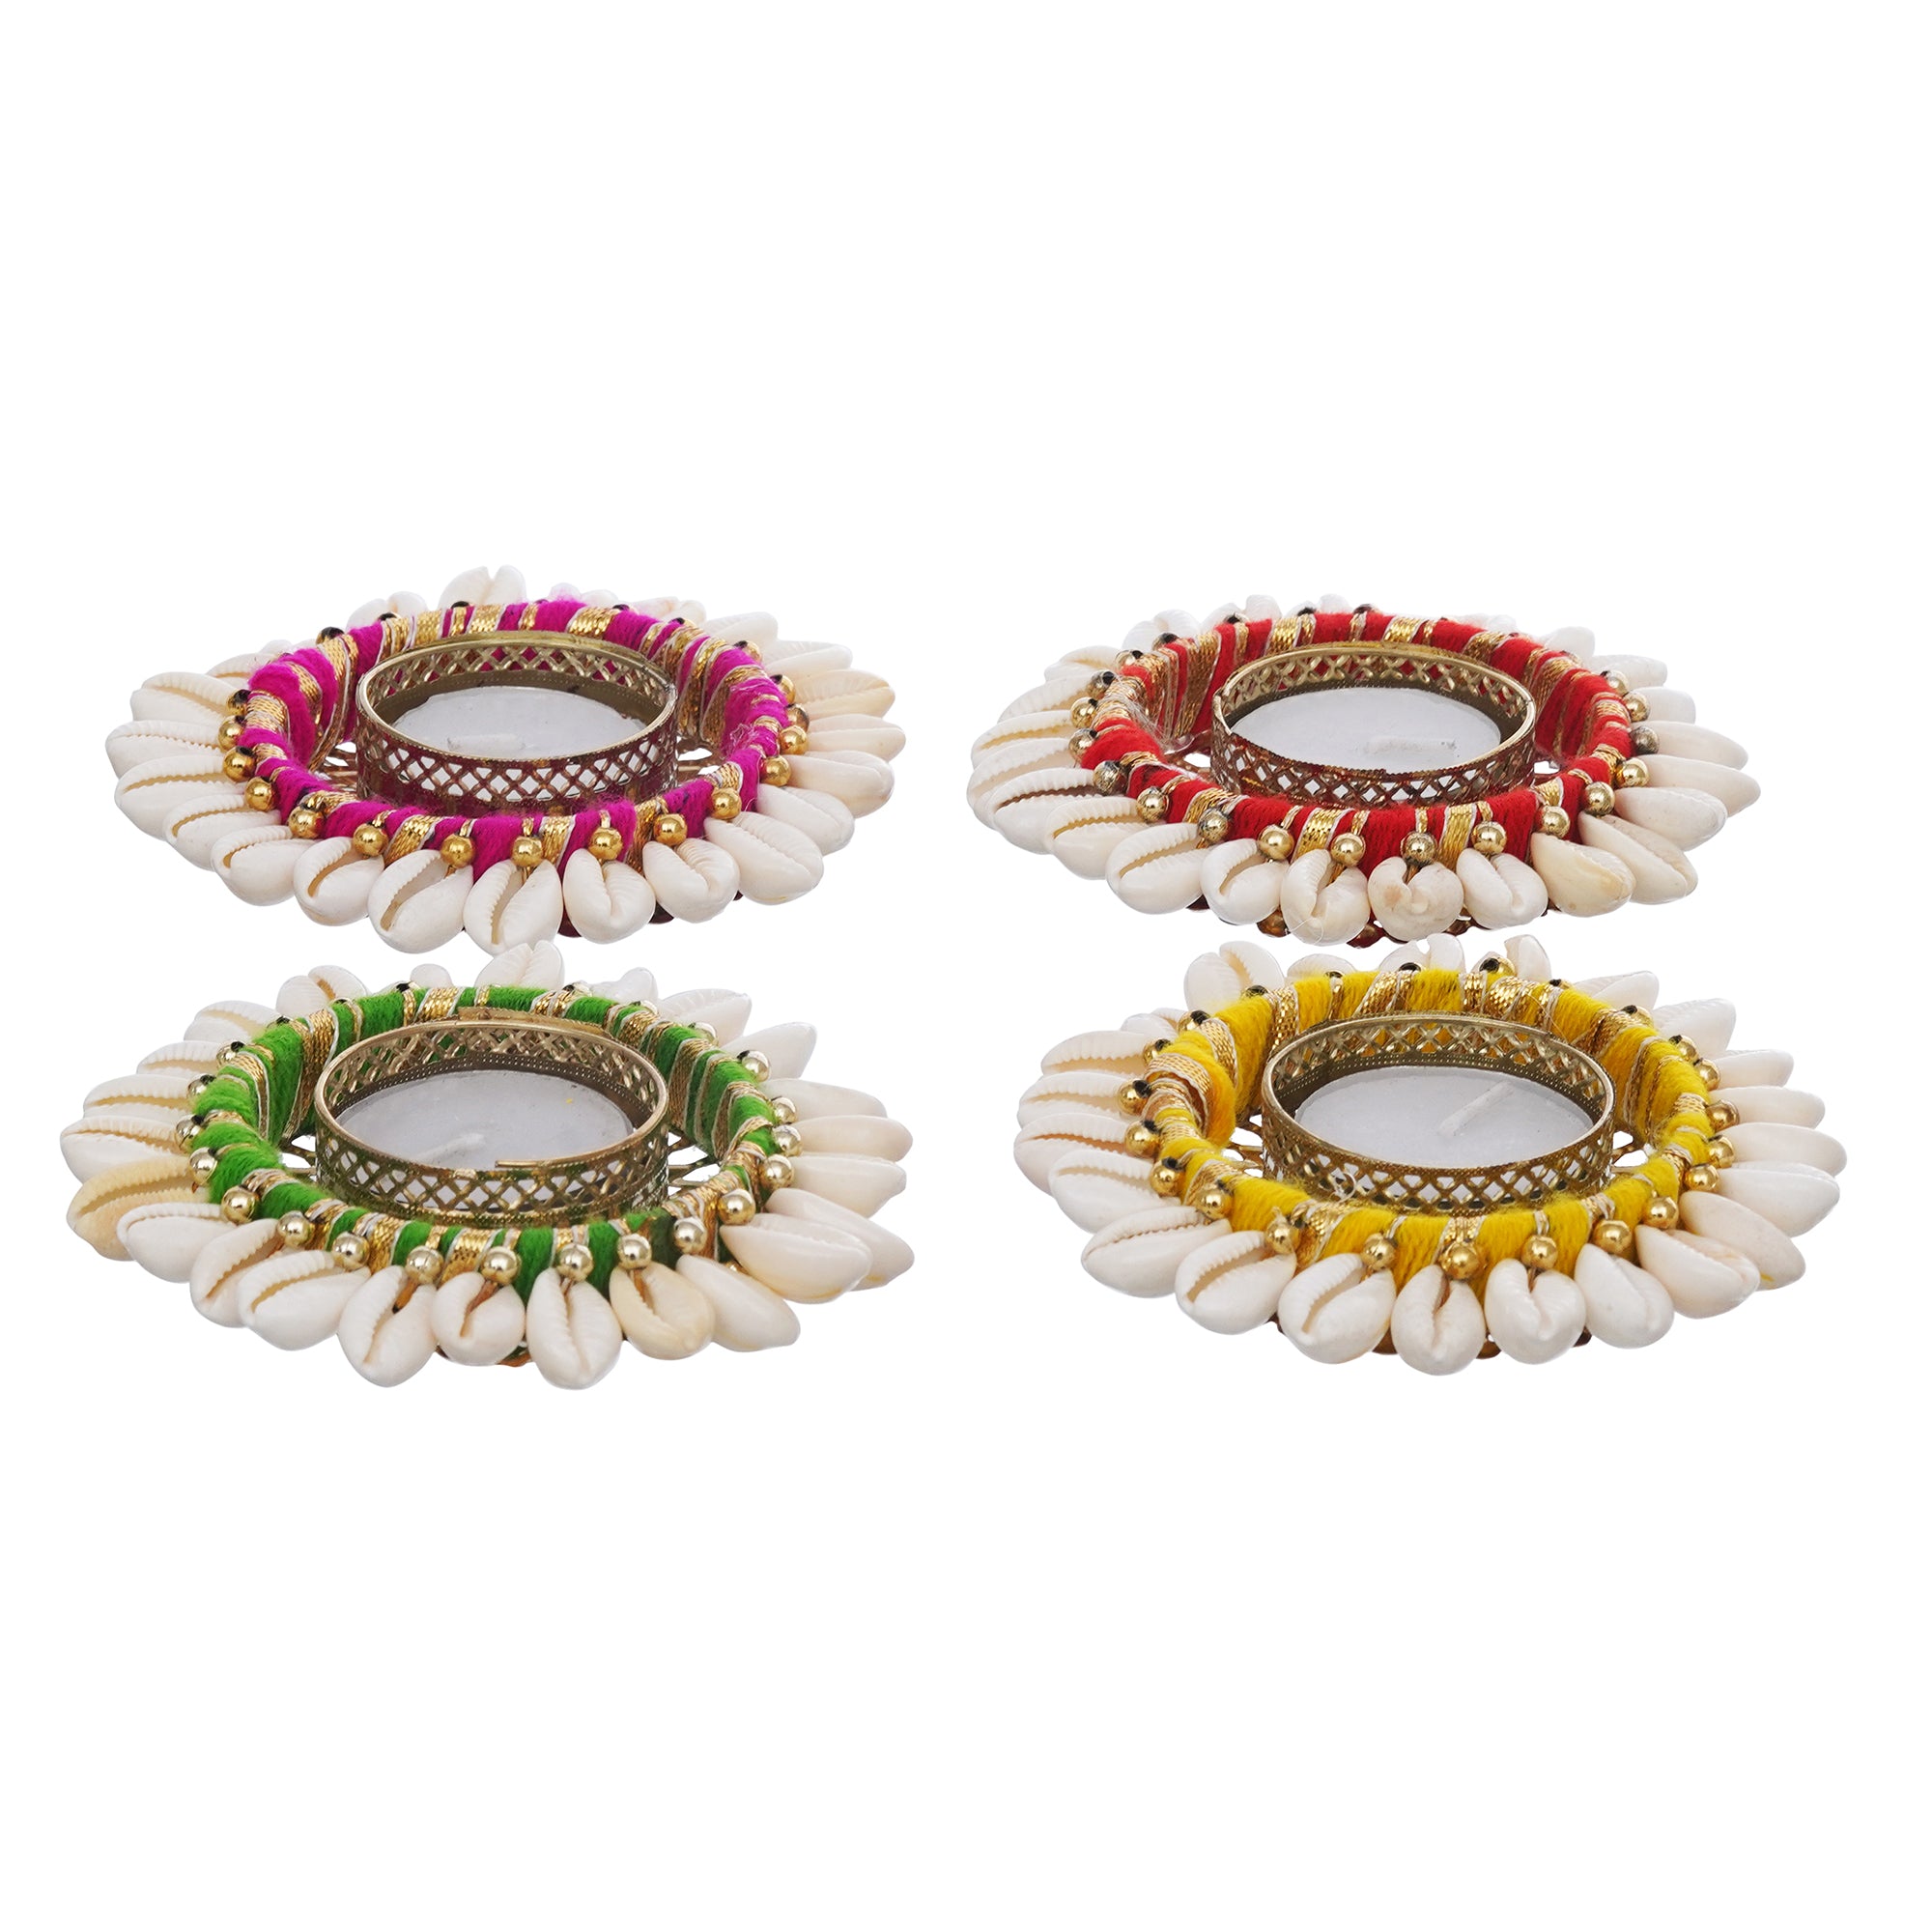 eCraftIndia Multicolor and White Cowrie Shell Decorative Metal Tea Light Holders (Set of 4) 7